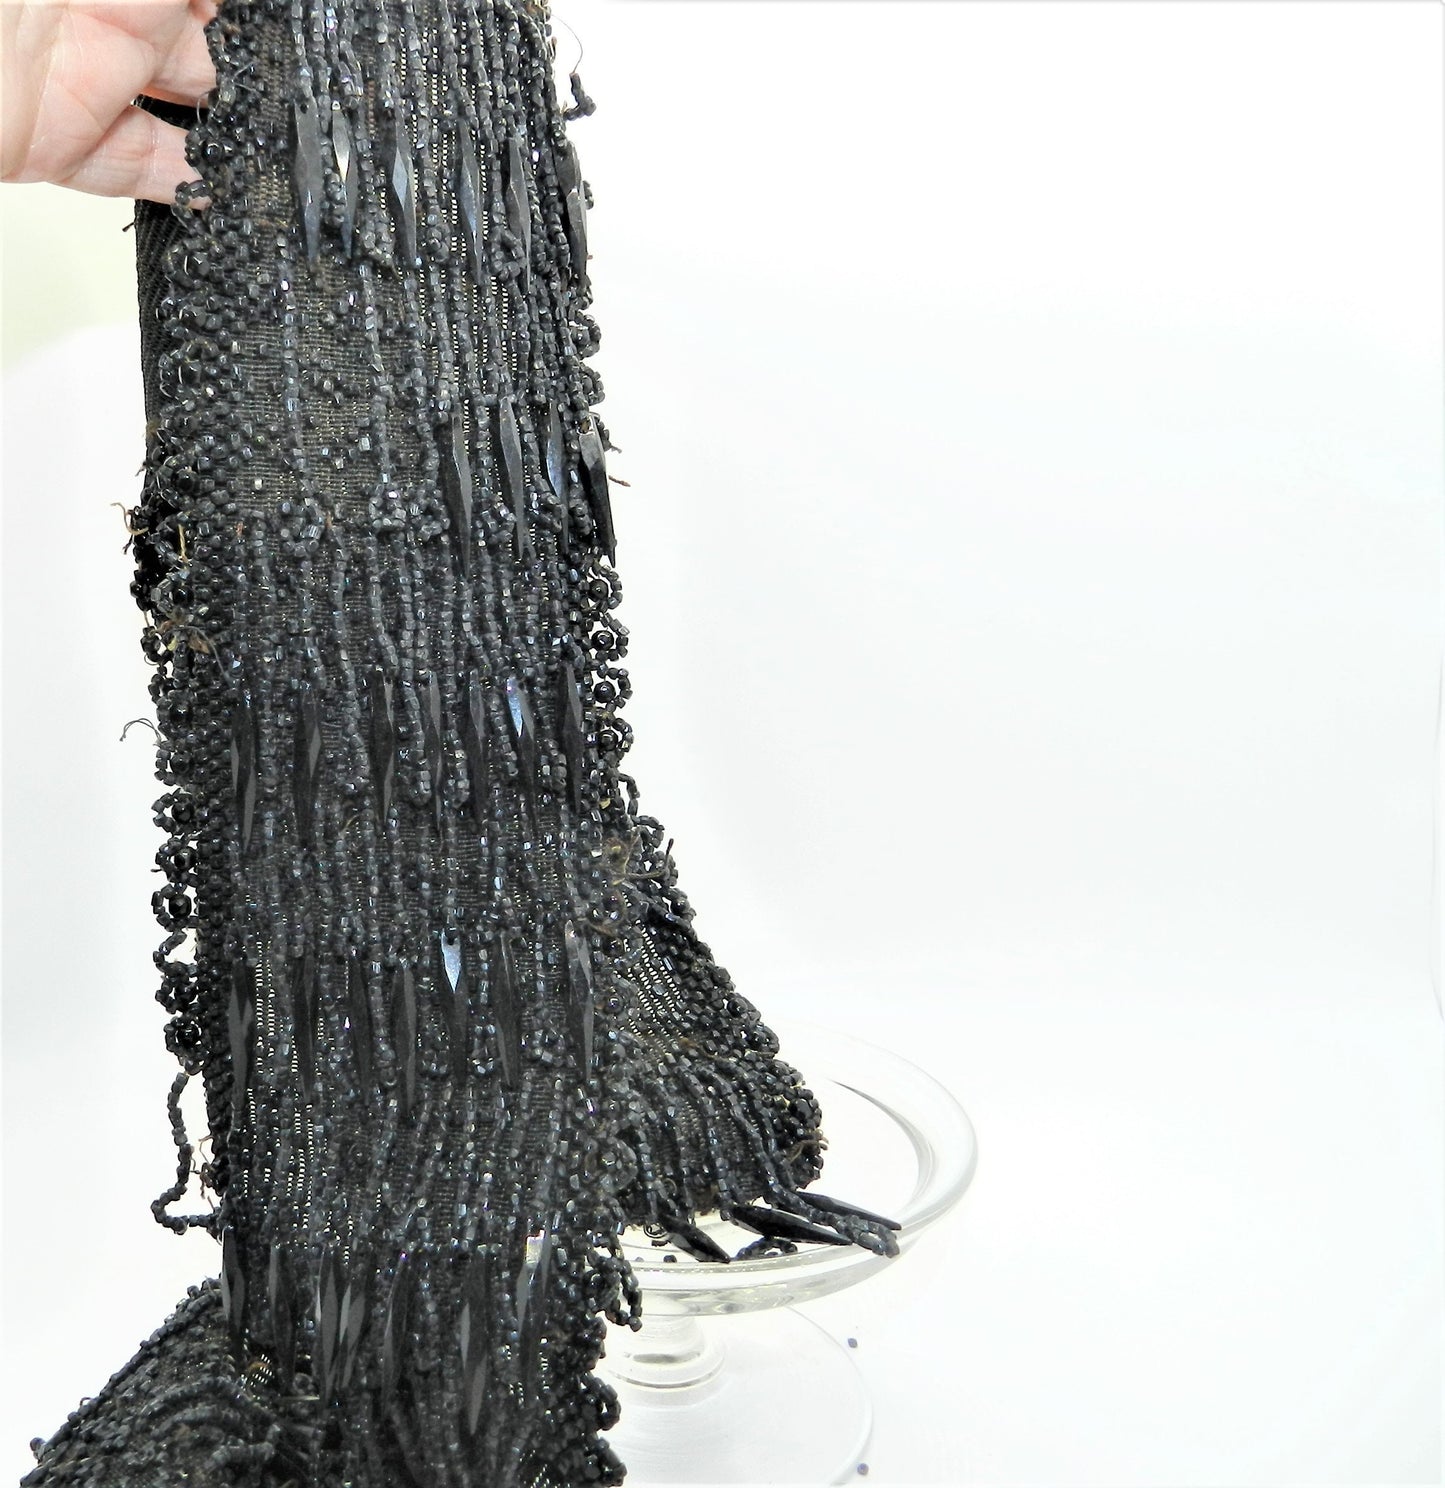 40 Inches Strip of Authentic Victorian French Jet Beads - Mourning Funeral Dress